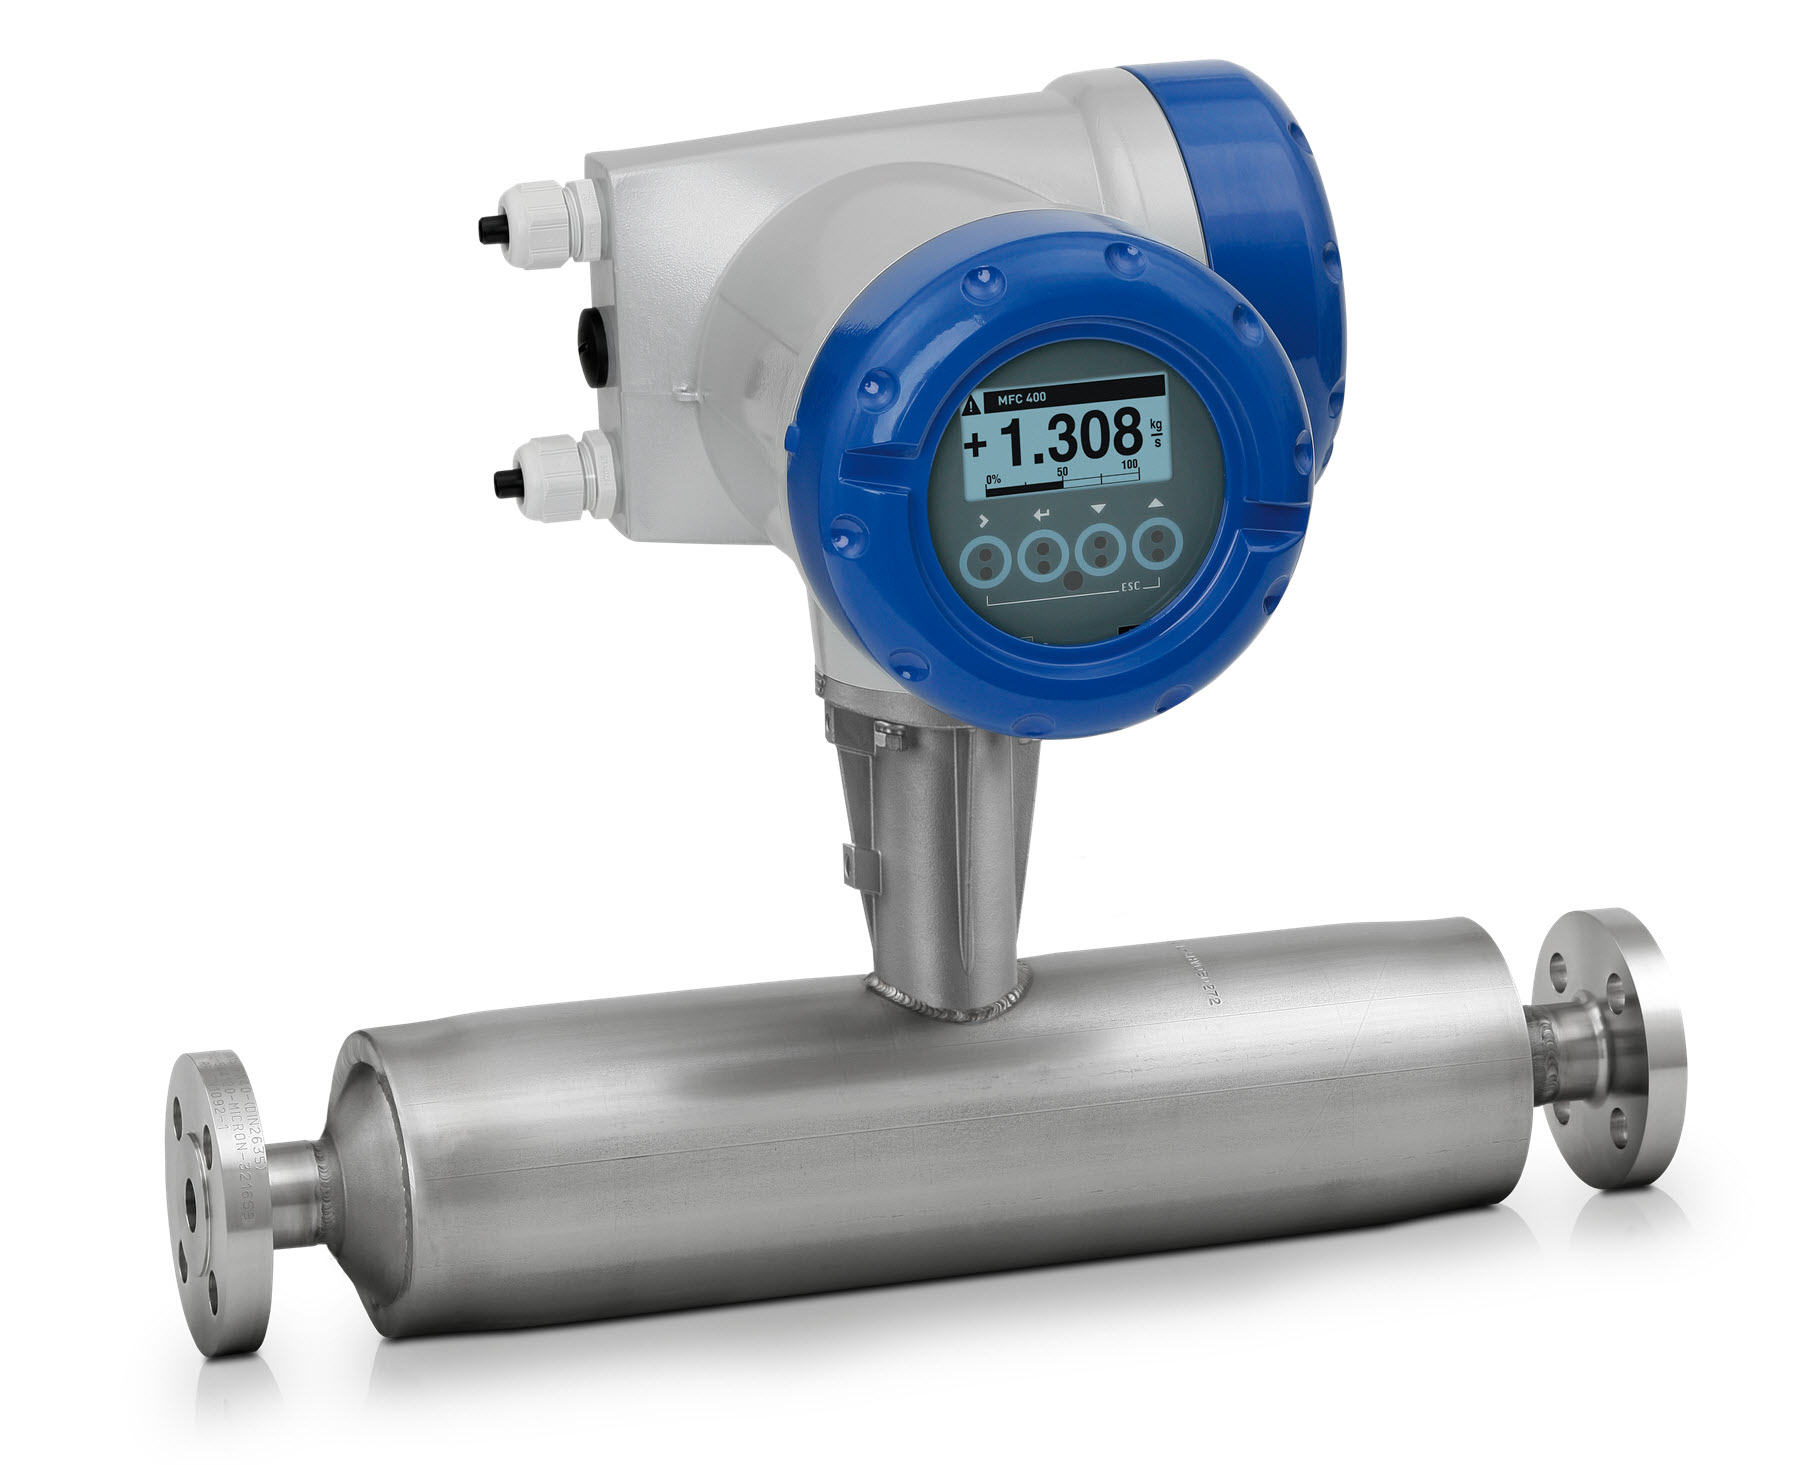 The Optimass 1000 is designed for the chemical, petrochemical, food and beverage, water and pharmaceutical industries.